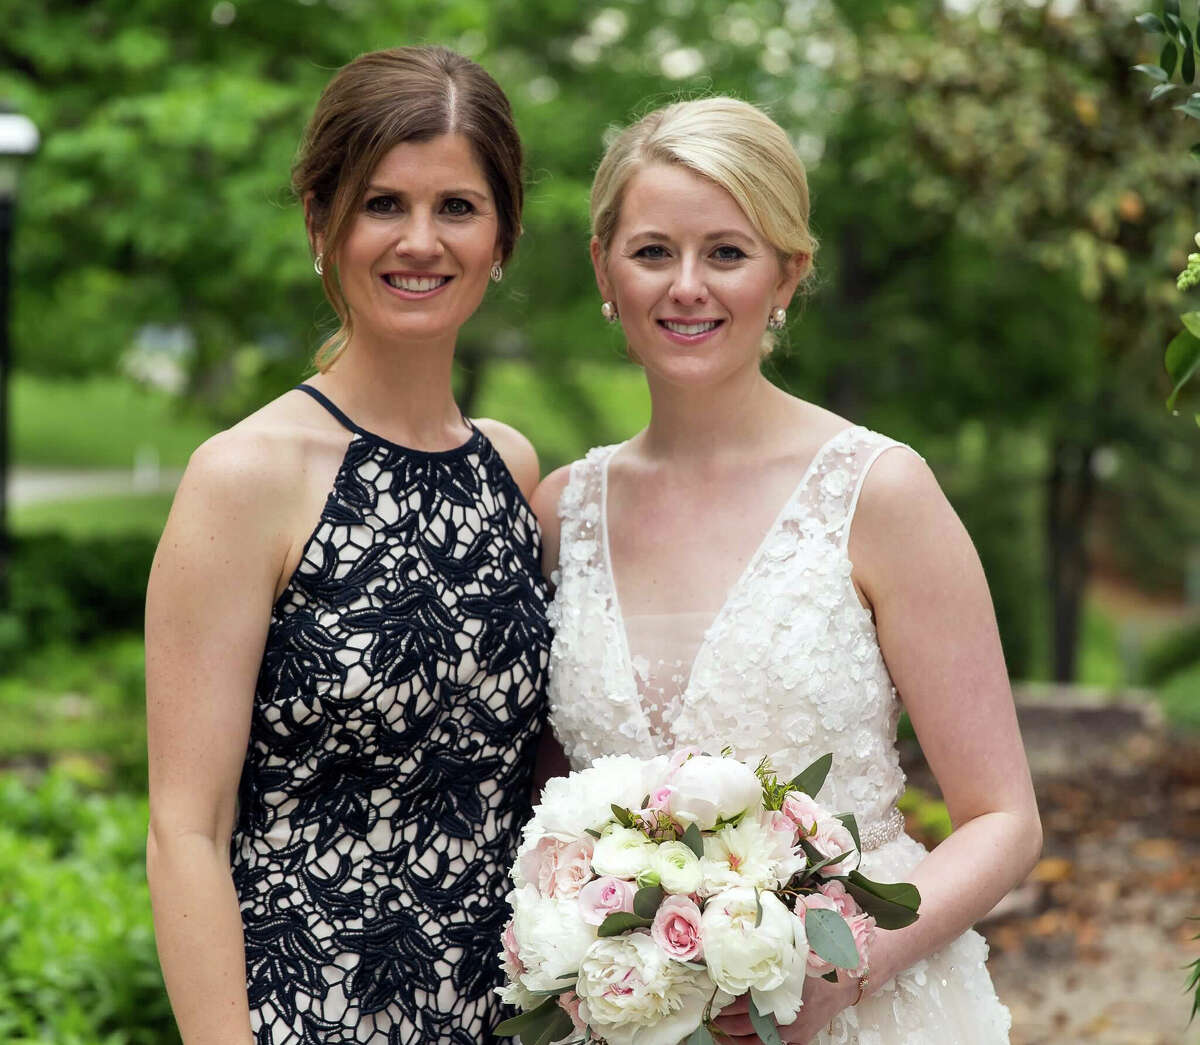 Jessica Richheimer, left, and her sister Meredith Gugger during Meredith’s wedding in 2018.